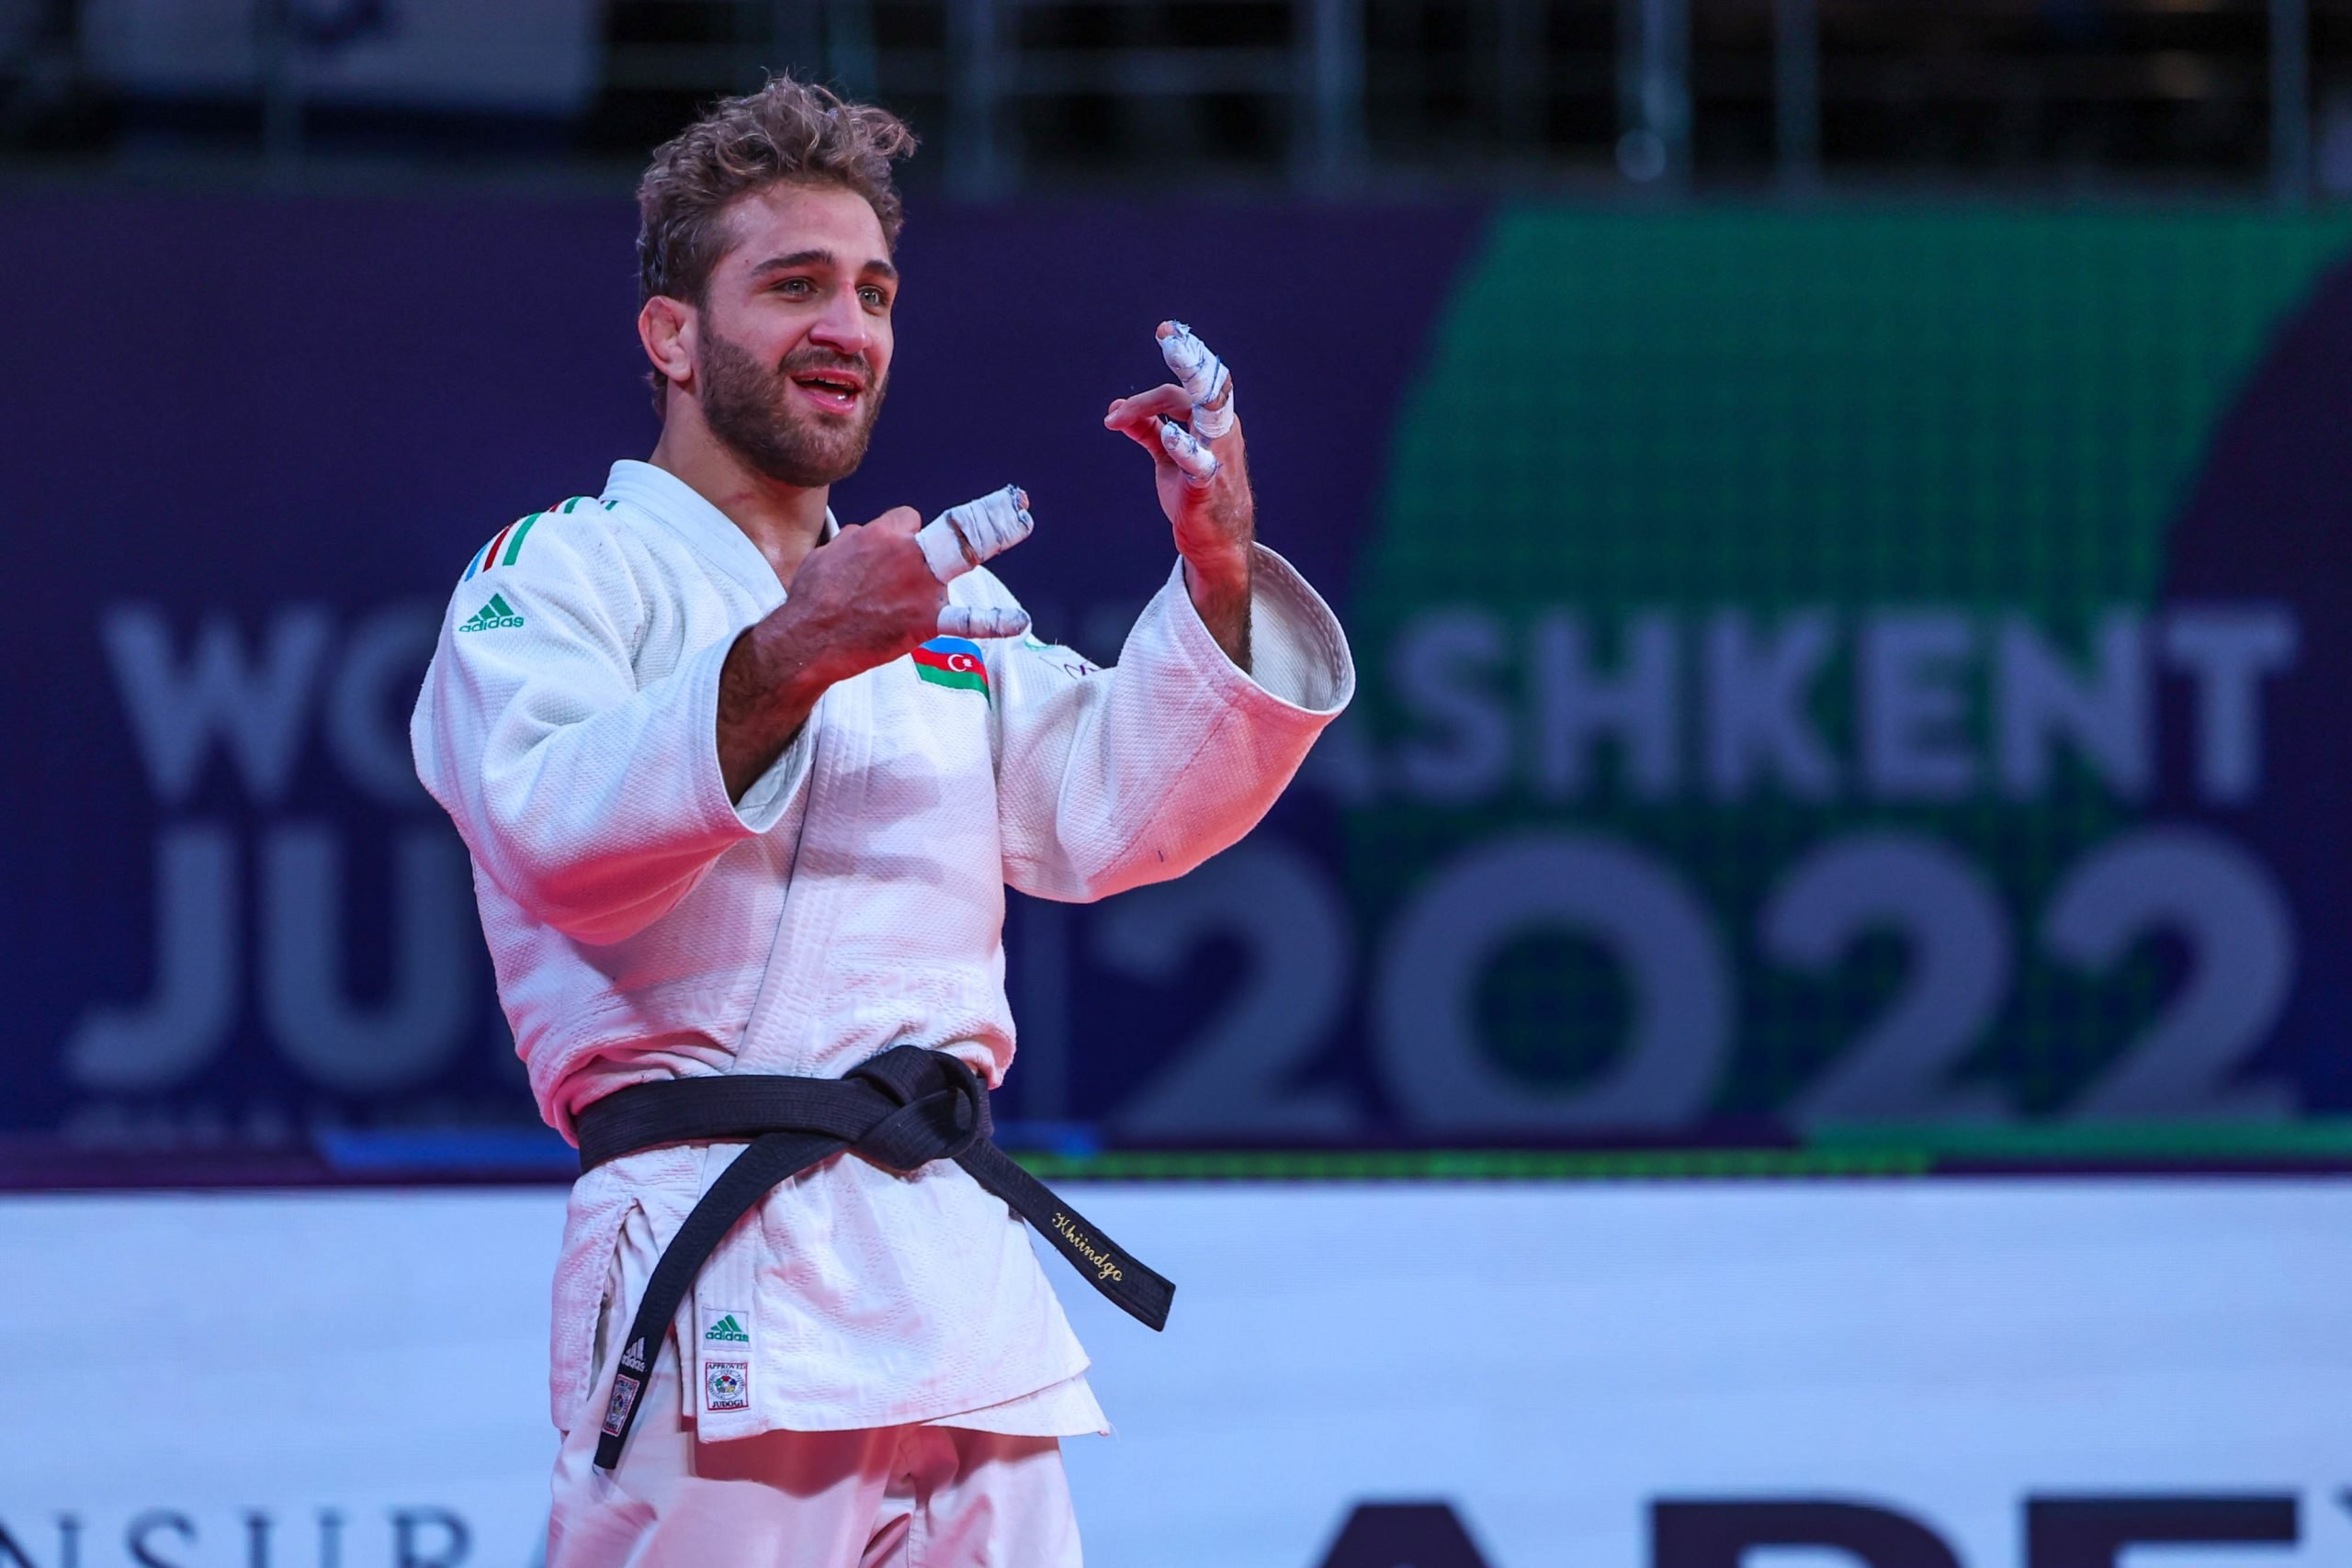 HEYDAROV TAKES SOLE MEDAL FOR EUROPE ON DAY THREE OF WORLD CHAMPIONSHIPS